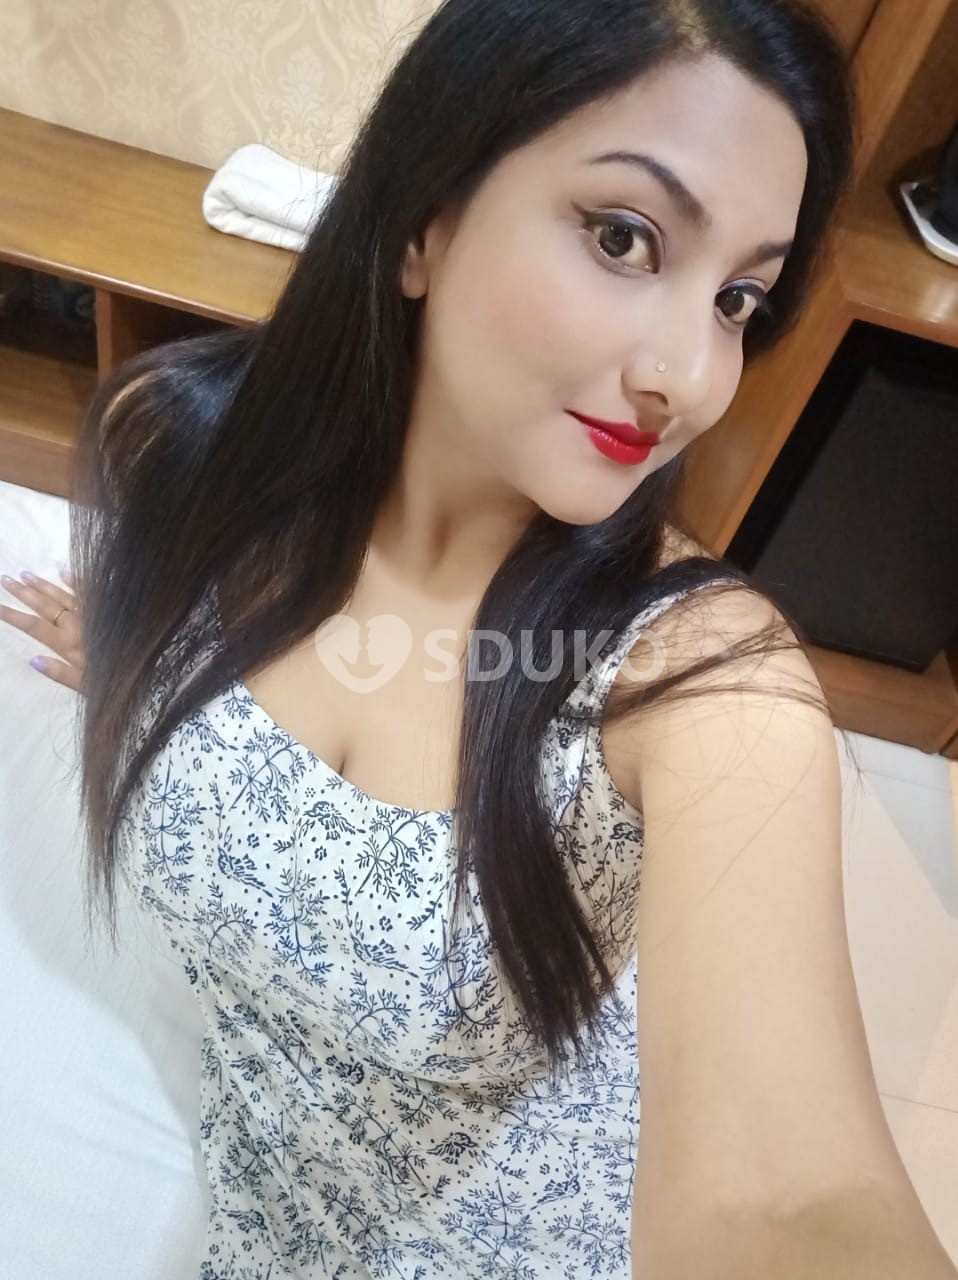 Myself shakshi delhi college girl and Hot busty available abb